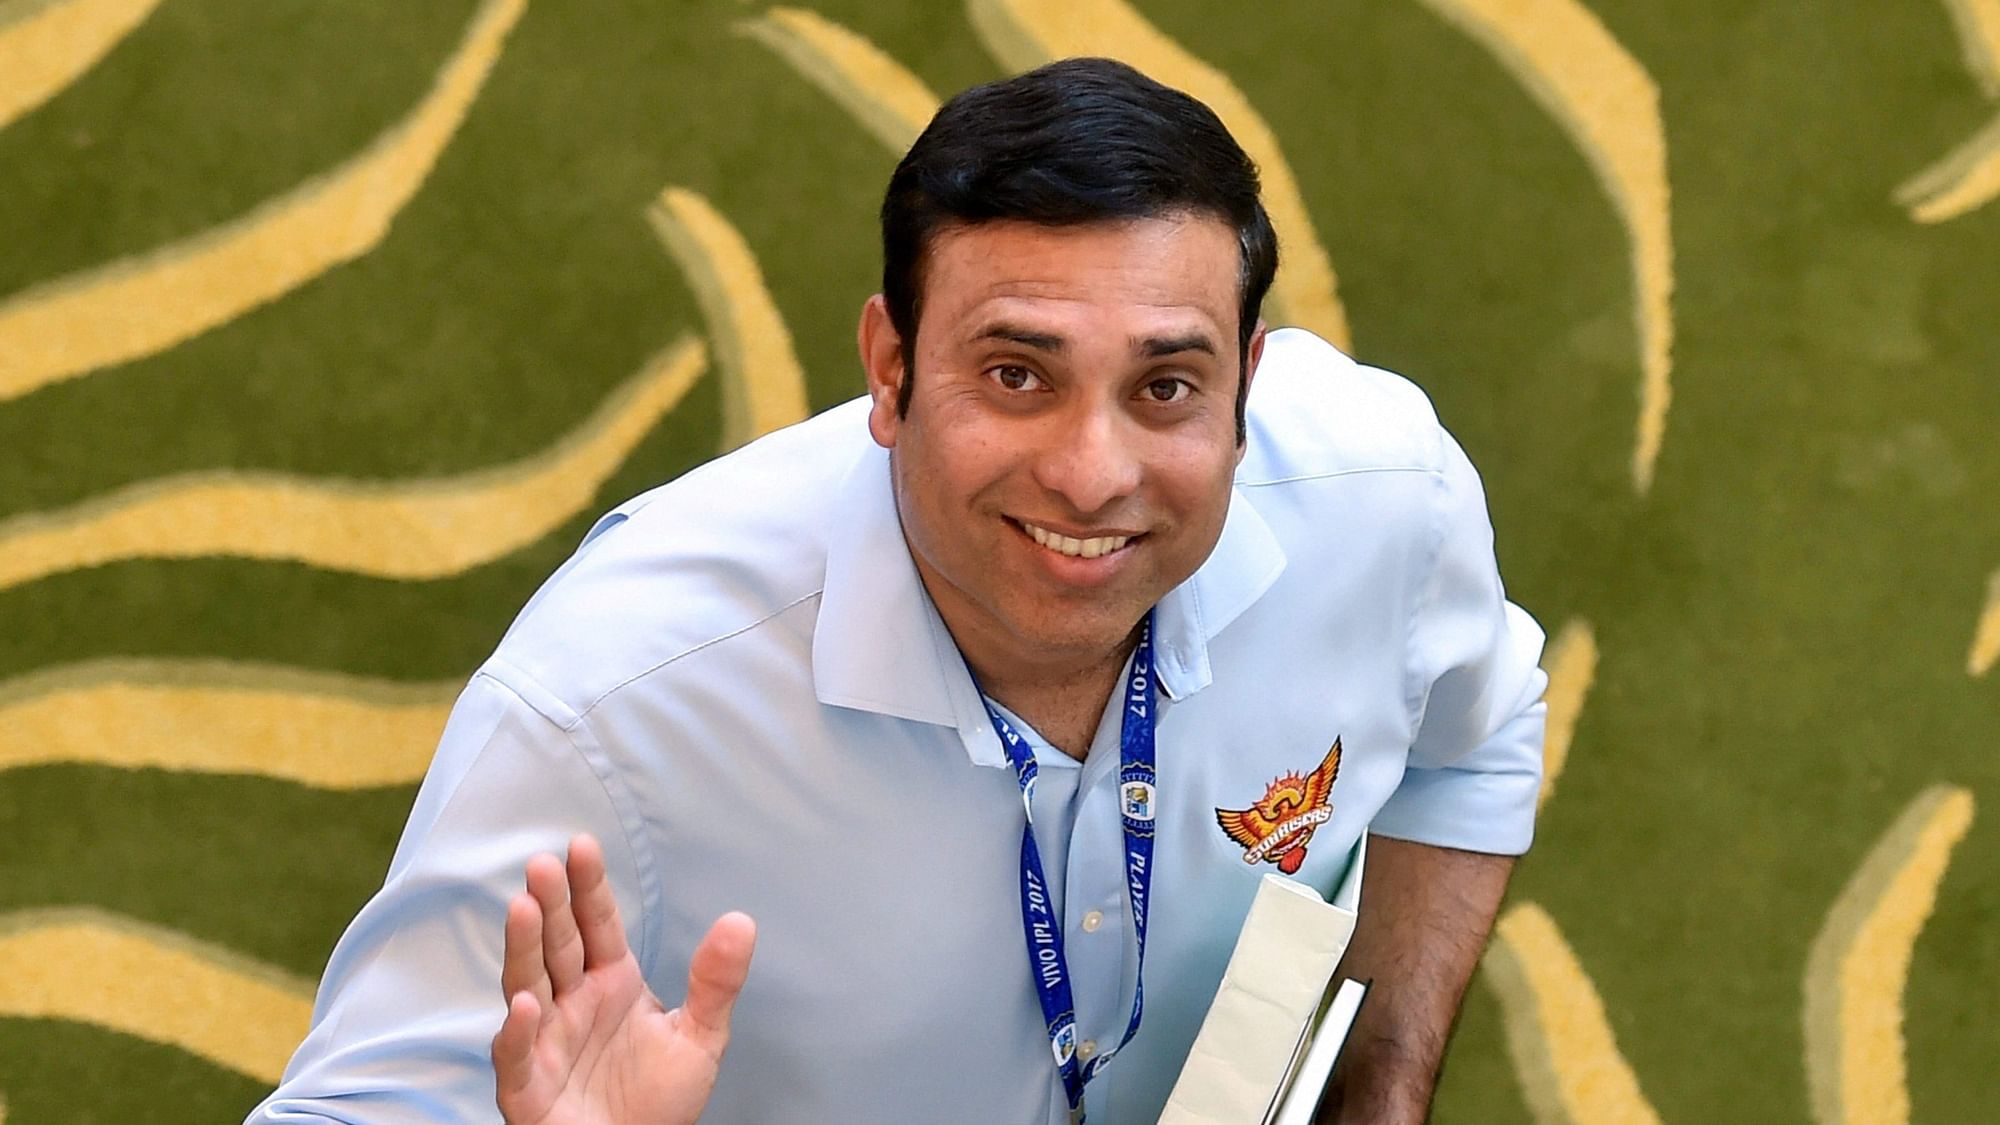 VVS Laxman said just being nice to someone doesn’t guarantee a spot in the IPL.